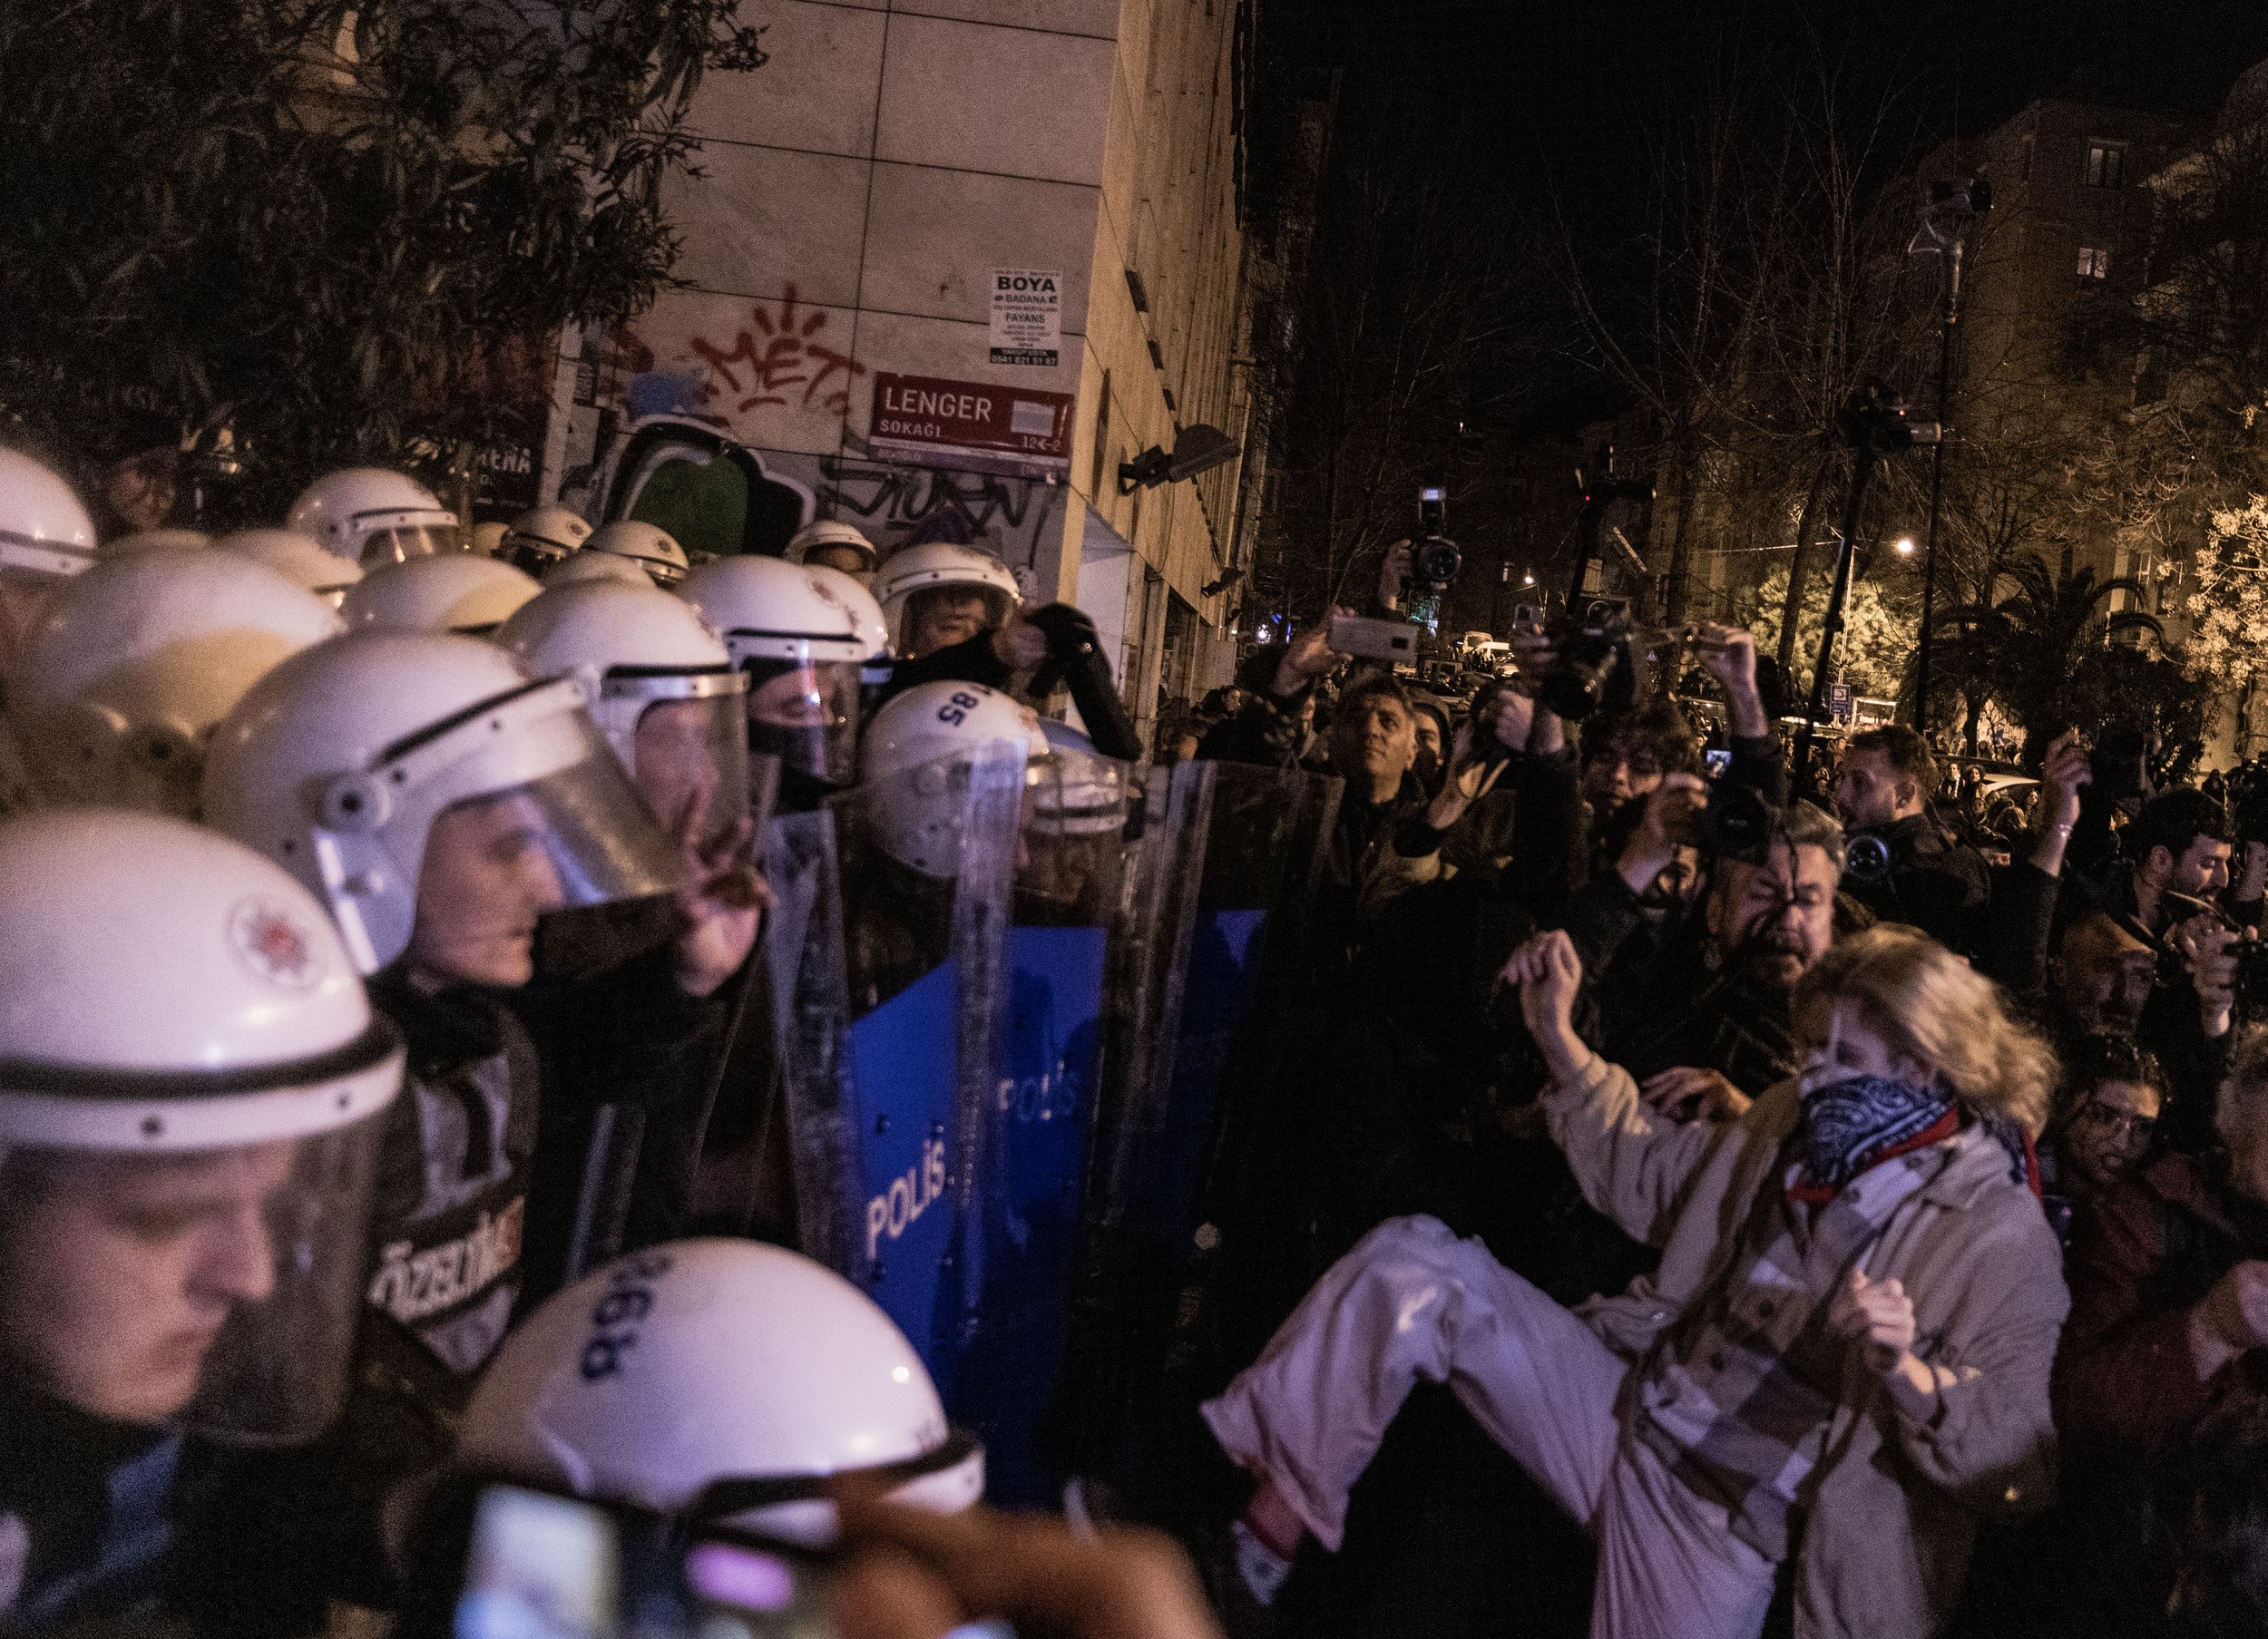  Police and civilians clash as they have in prior years demonstrating the Turkish government’s aggressive response to public protesting.  